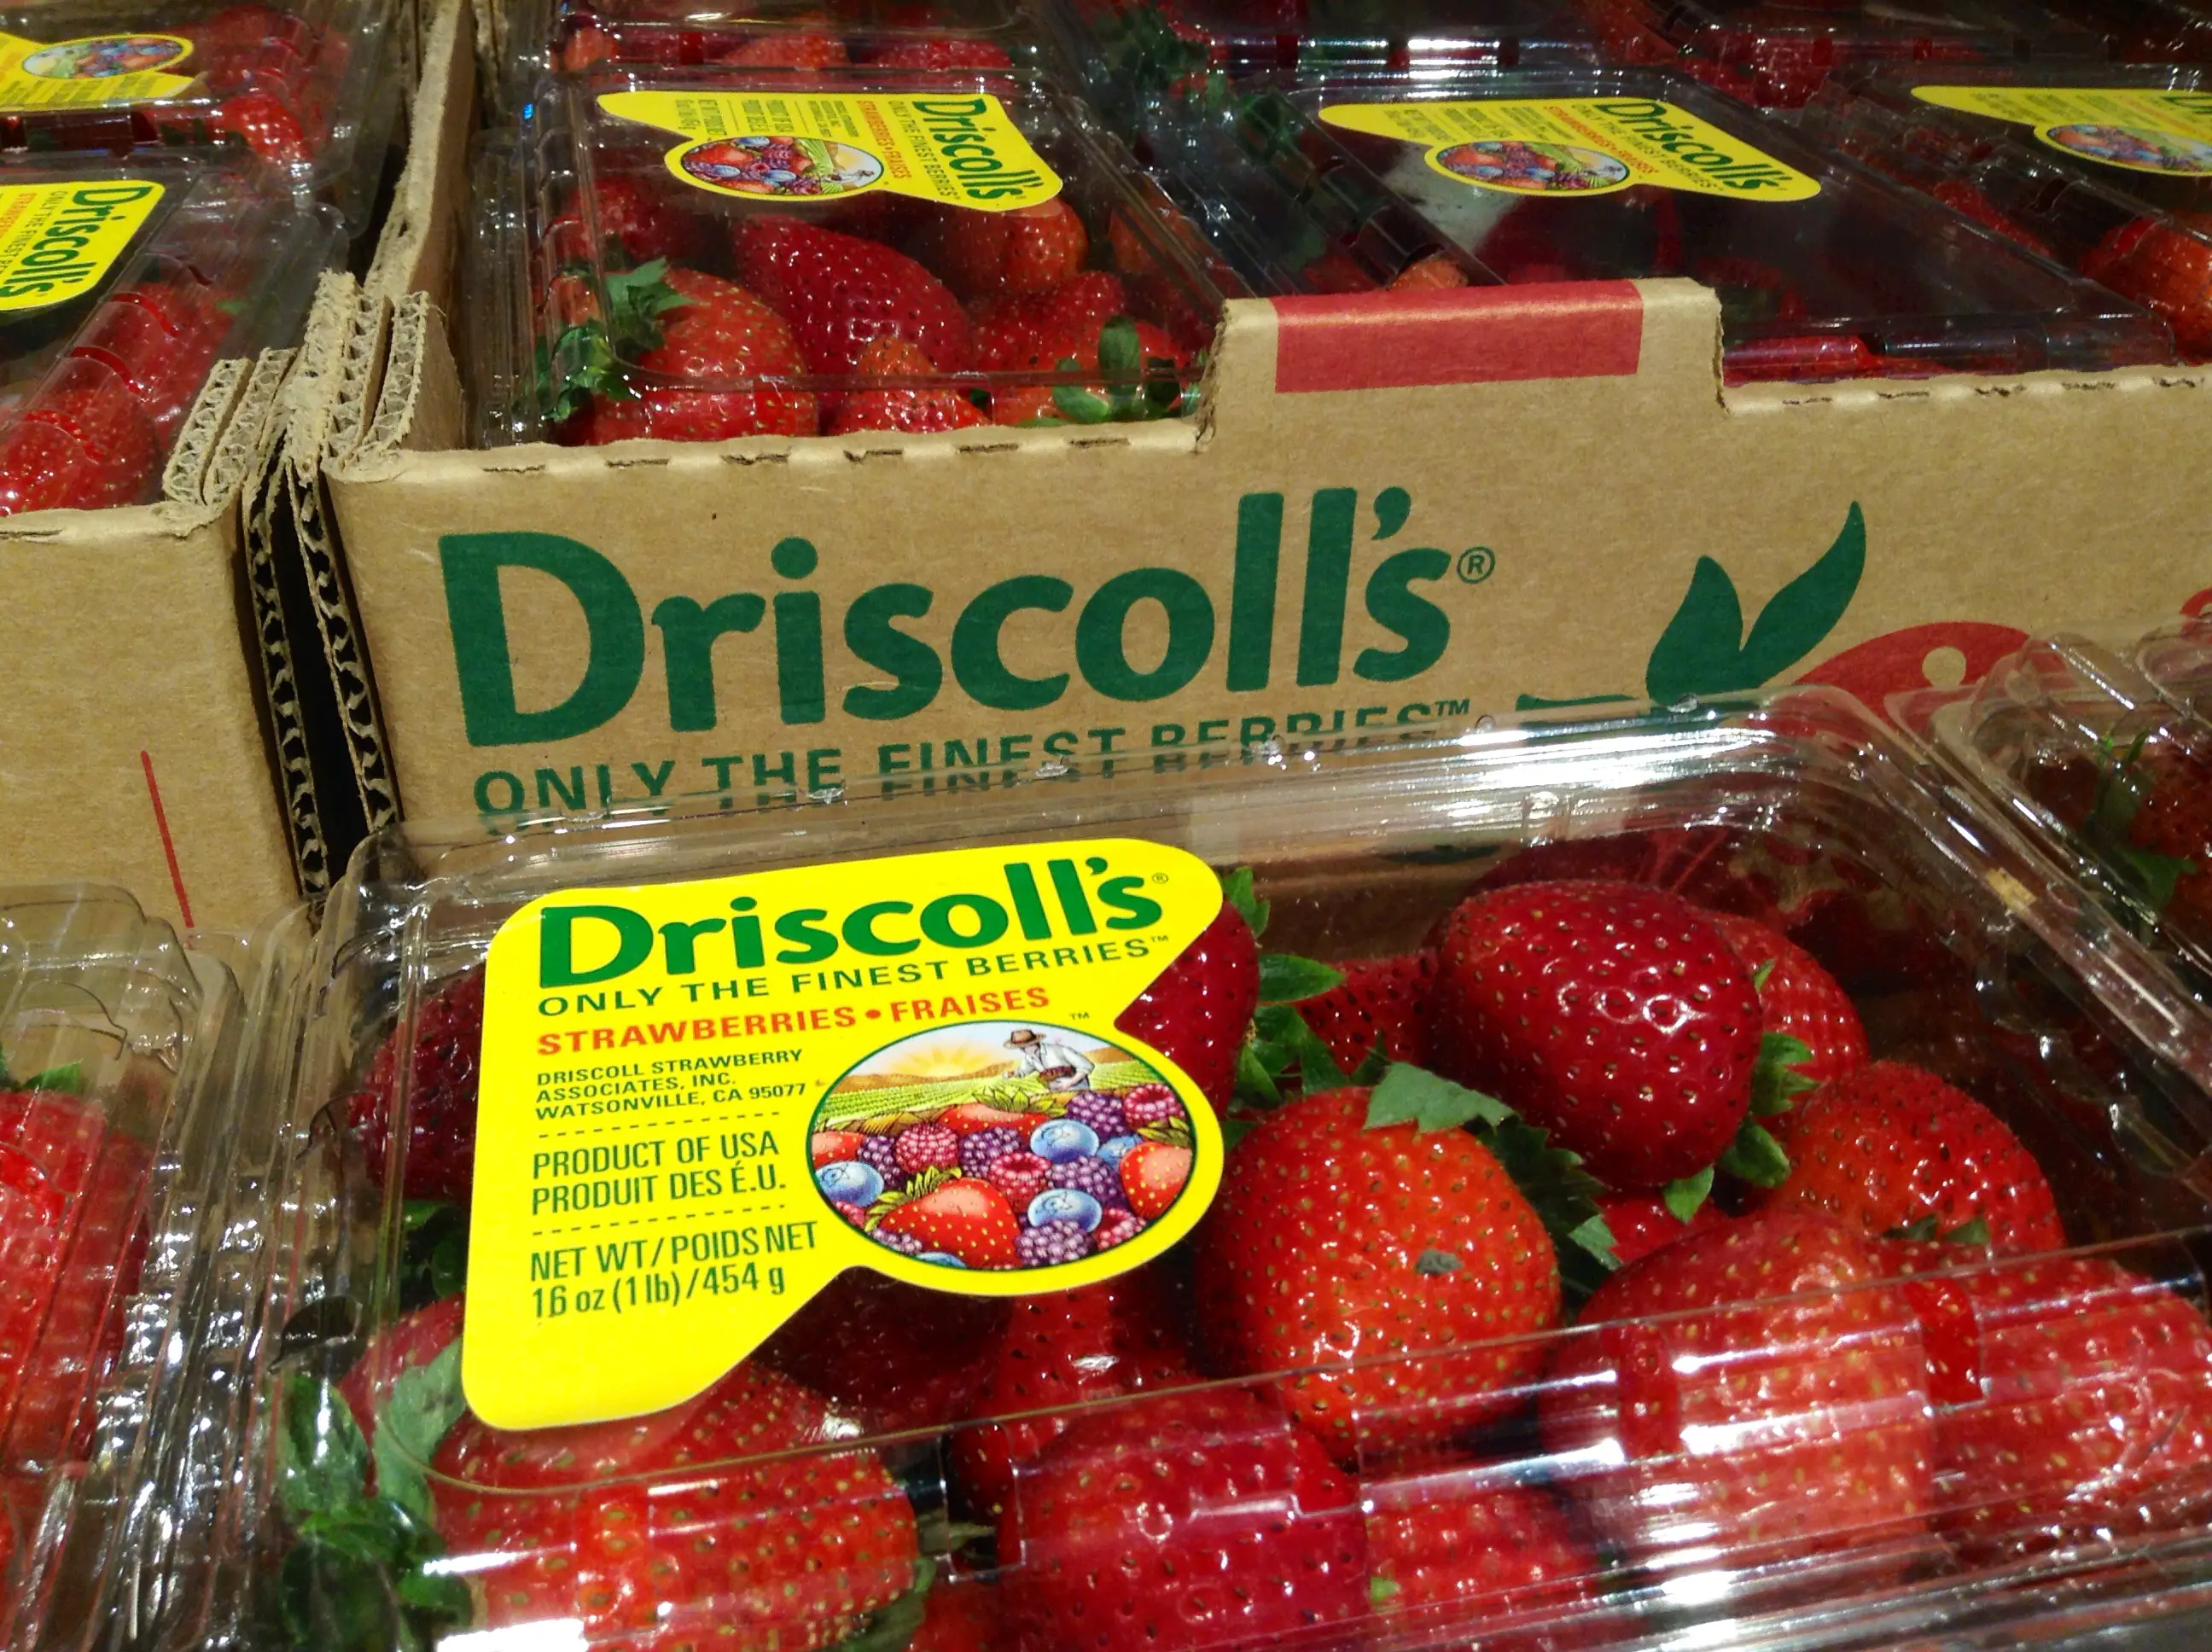 Strawberries are cheap and plentiful in the United States, but at what cost?